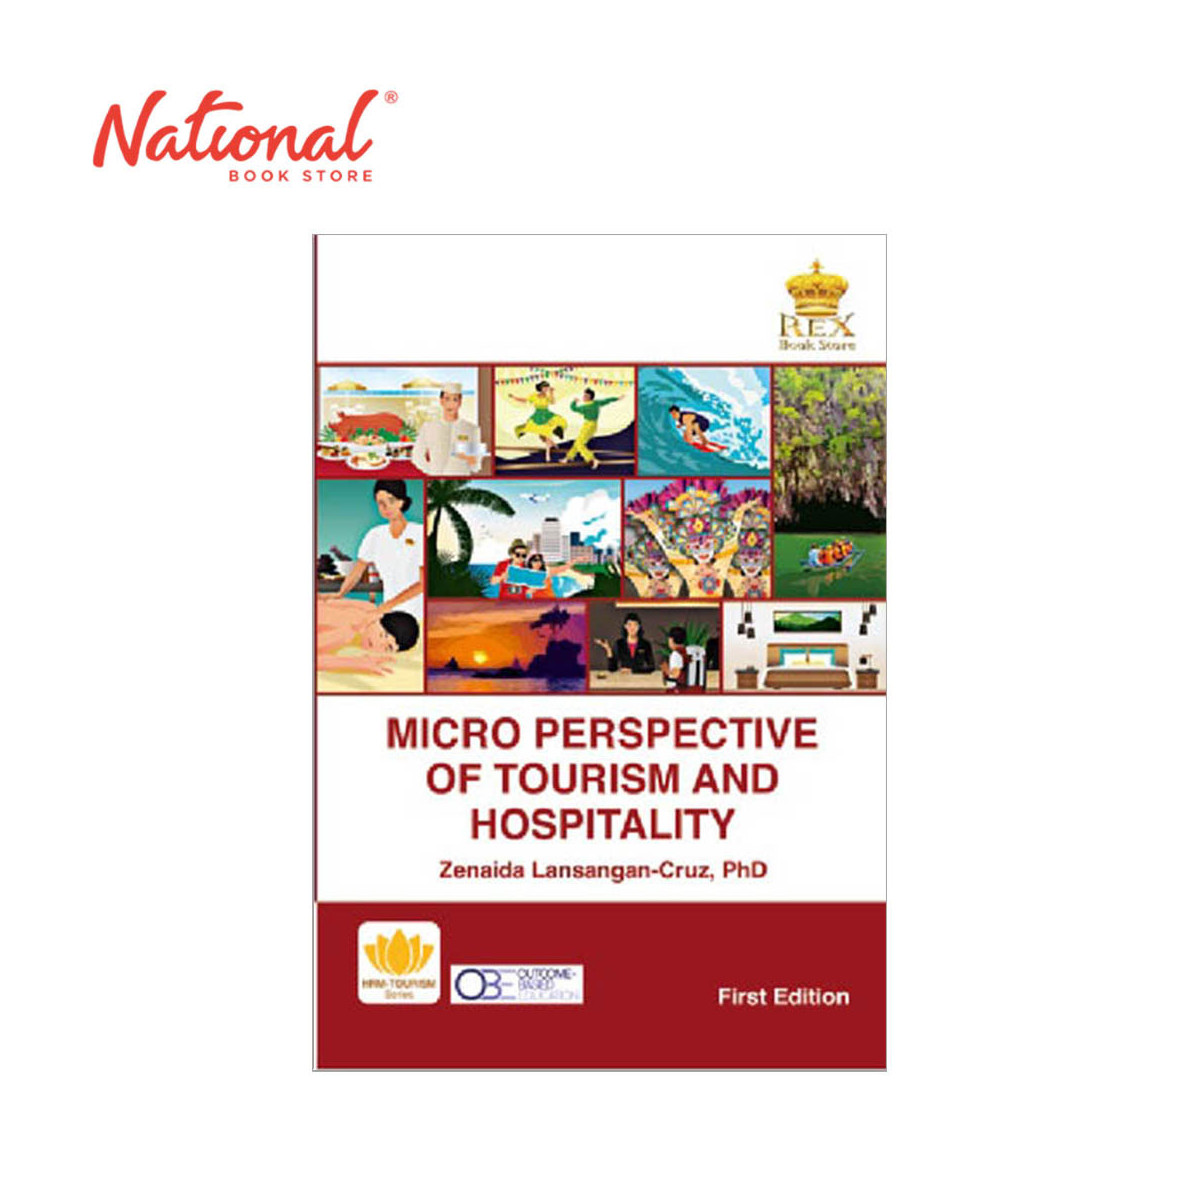 micro perspective of tourism and hospitality book pdf